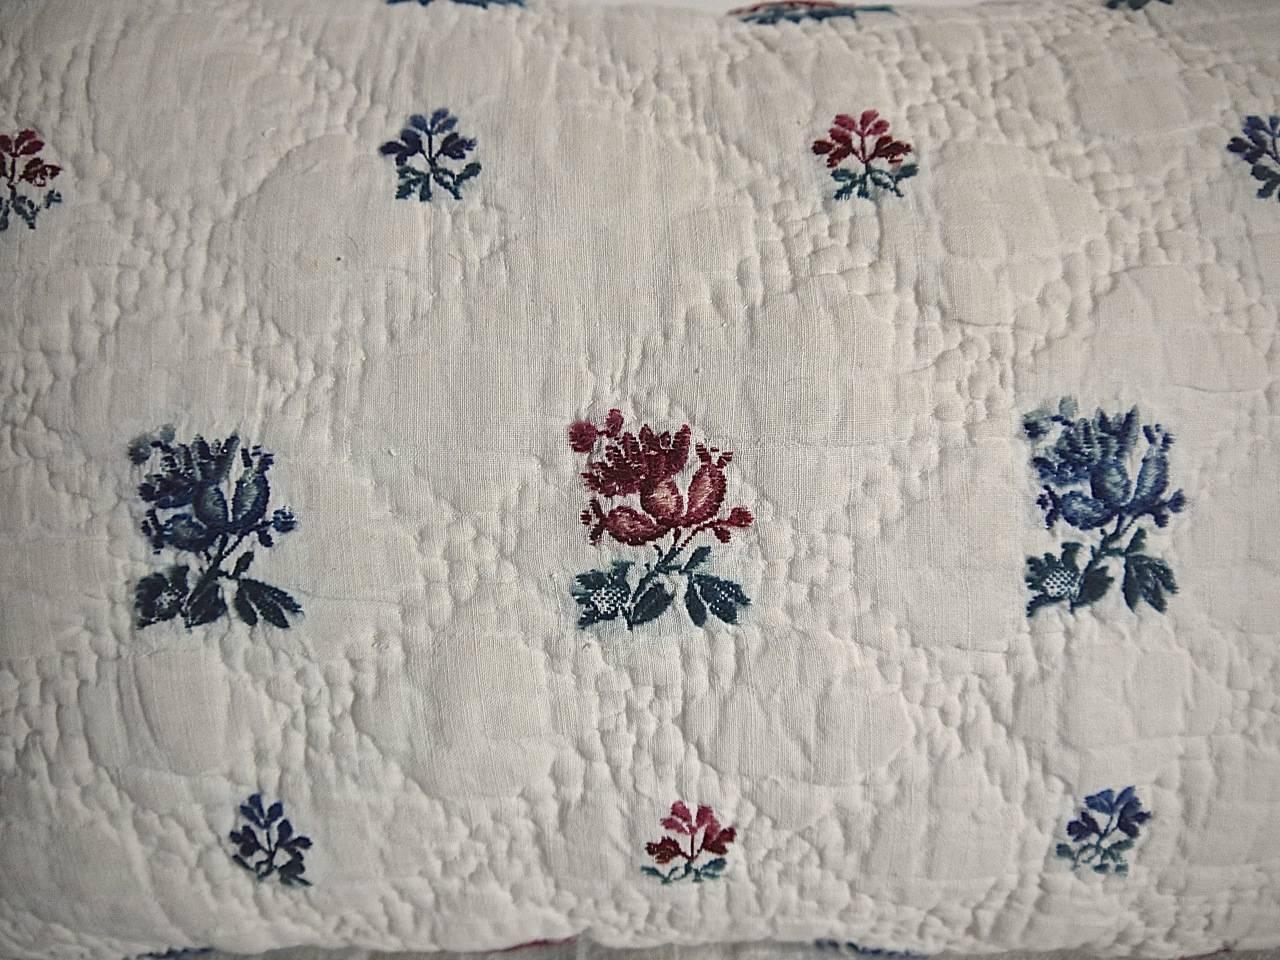 French Provincial Late 18th Century French Antique Wool Woven on Linen Flower Motif Pillow